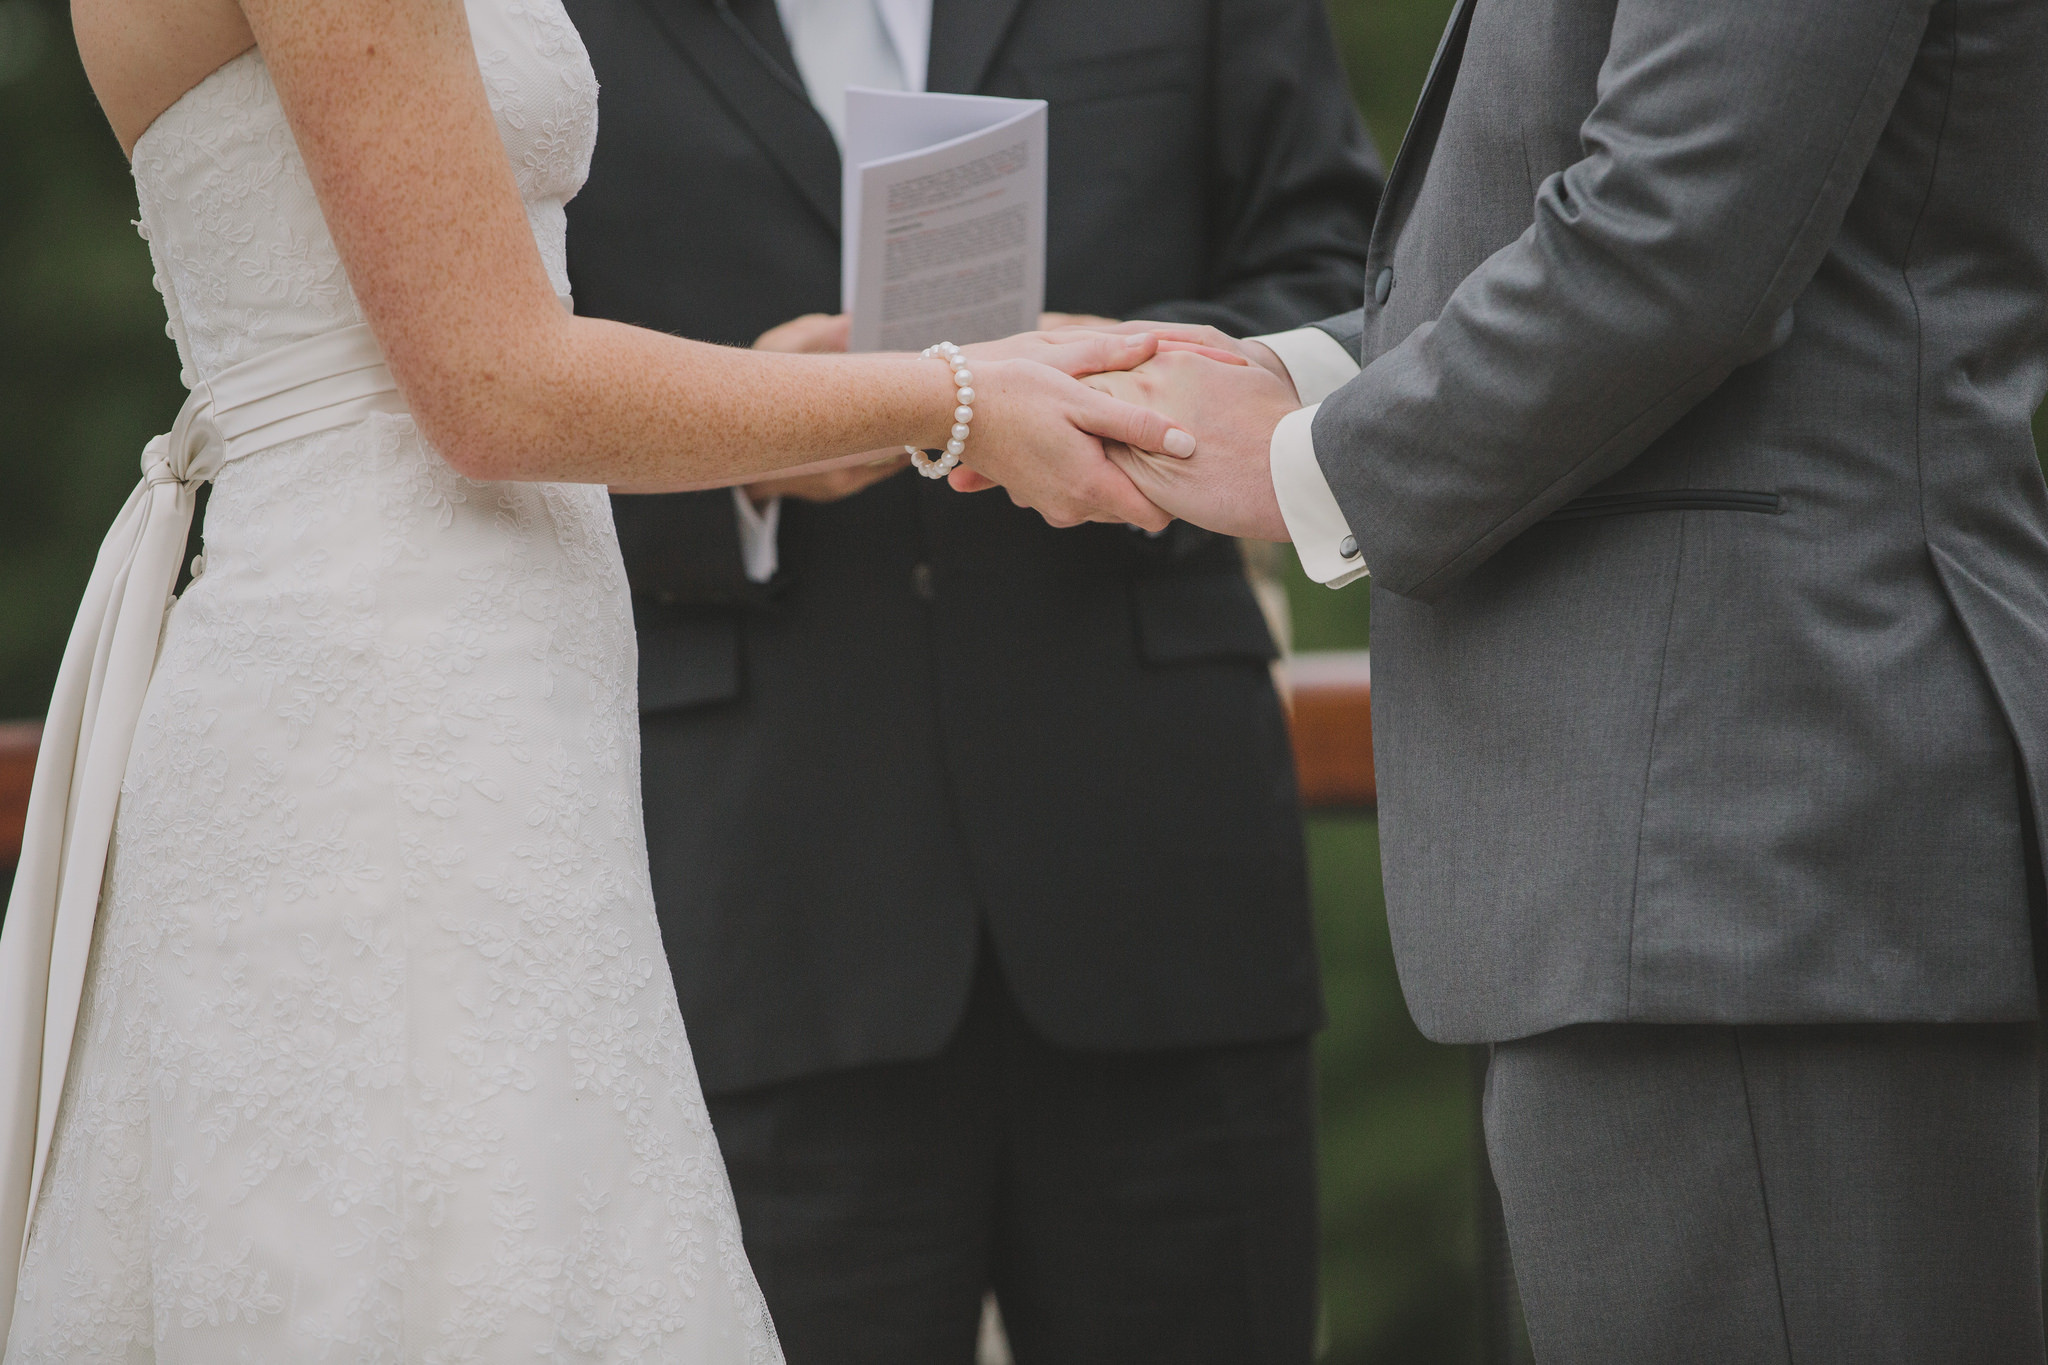 Real Wedding Vows
 Real Wedding Vows That Will Make You Laugh and Cry